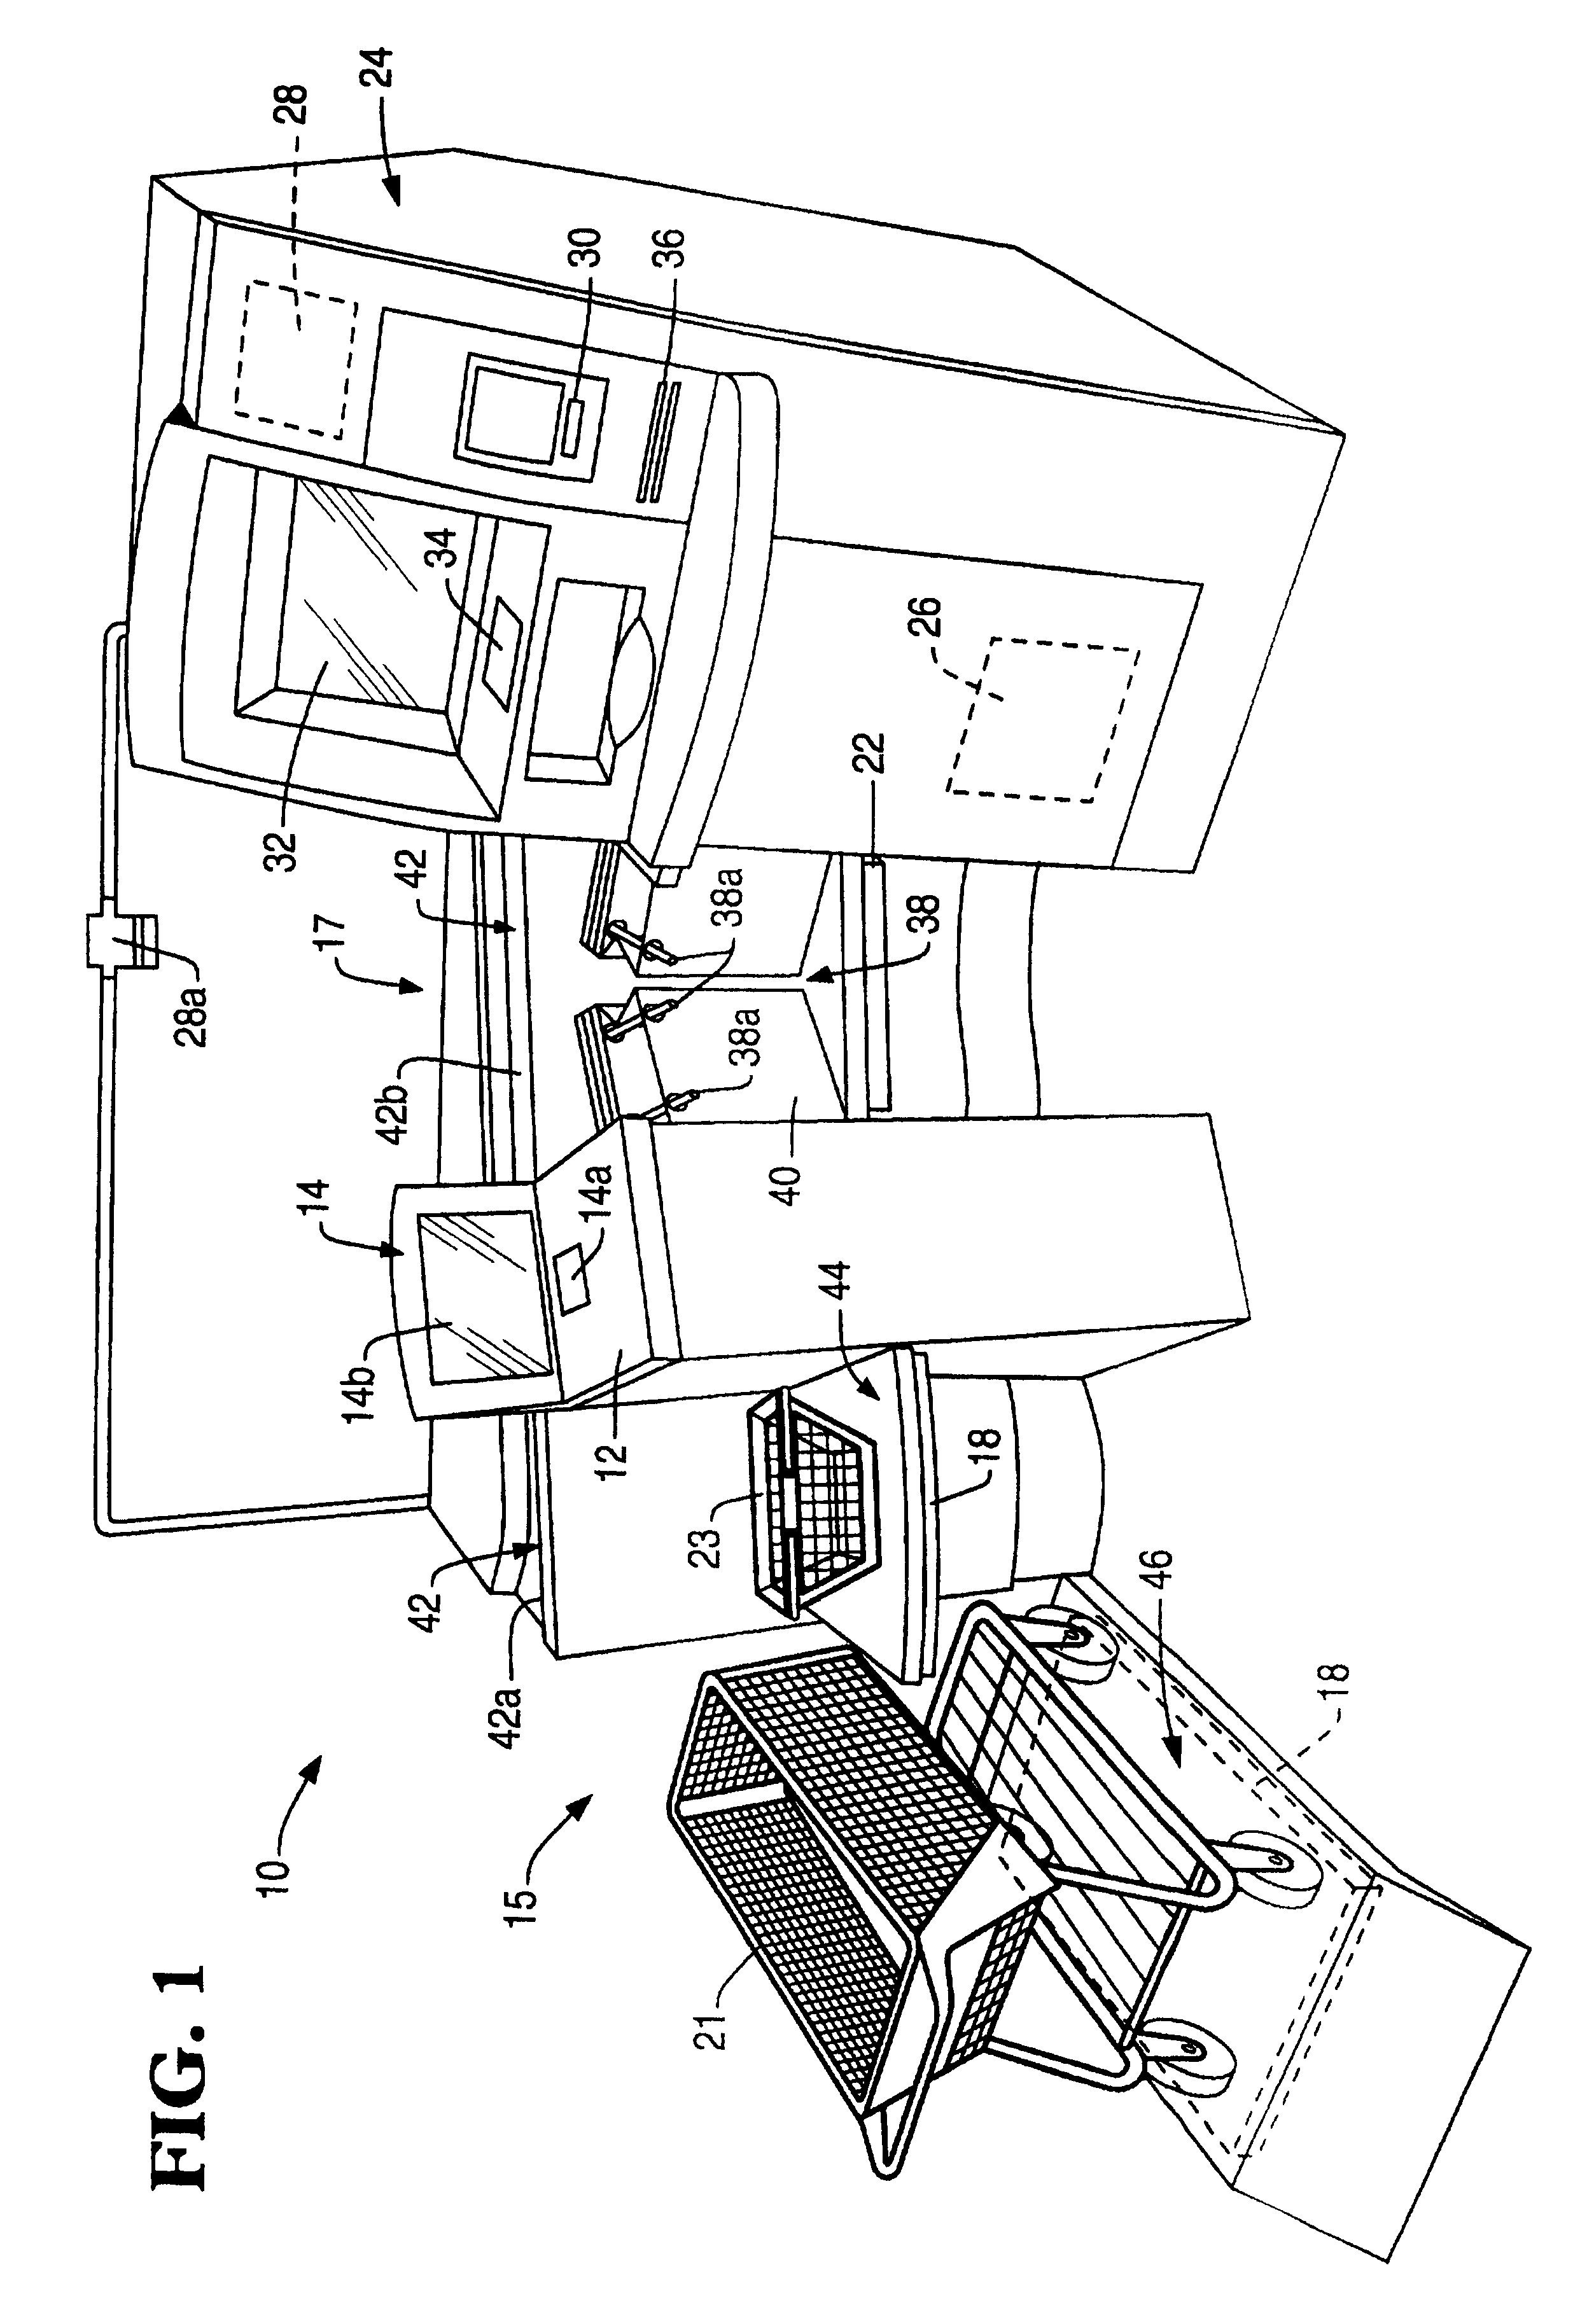 Method of monitoring item shuffling in a post-scan area of a self-service checkout terminal